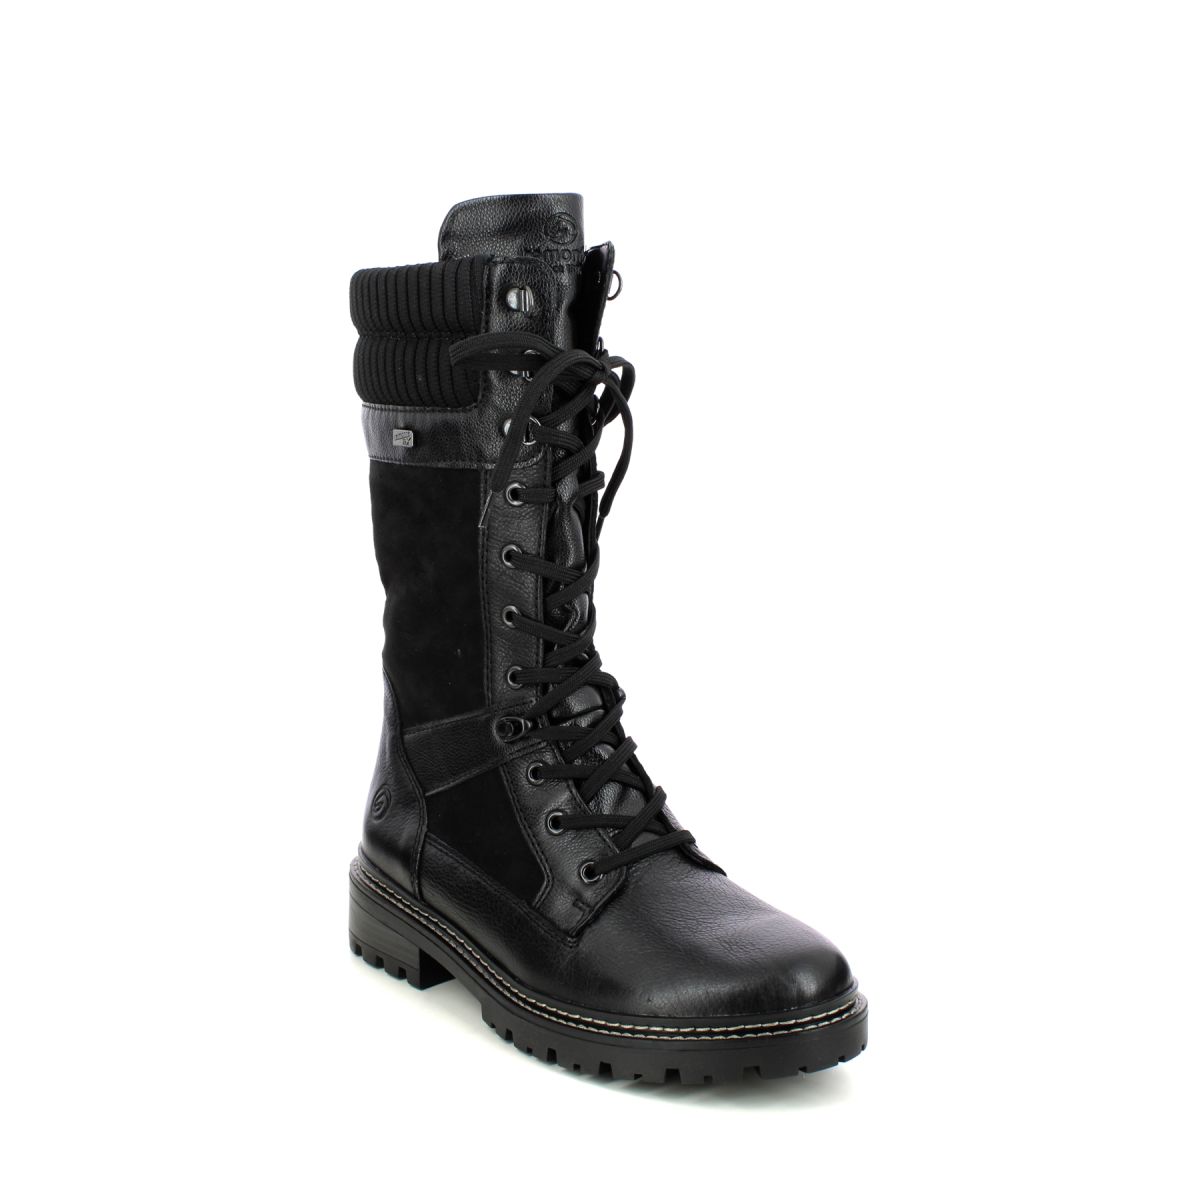 Remonte D0B76-01 Astra Lace Tex Black leather Womens Mid Calf Boots in a Plain Leather in Size 39